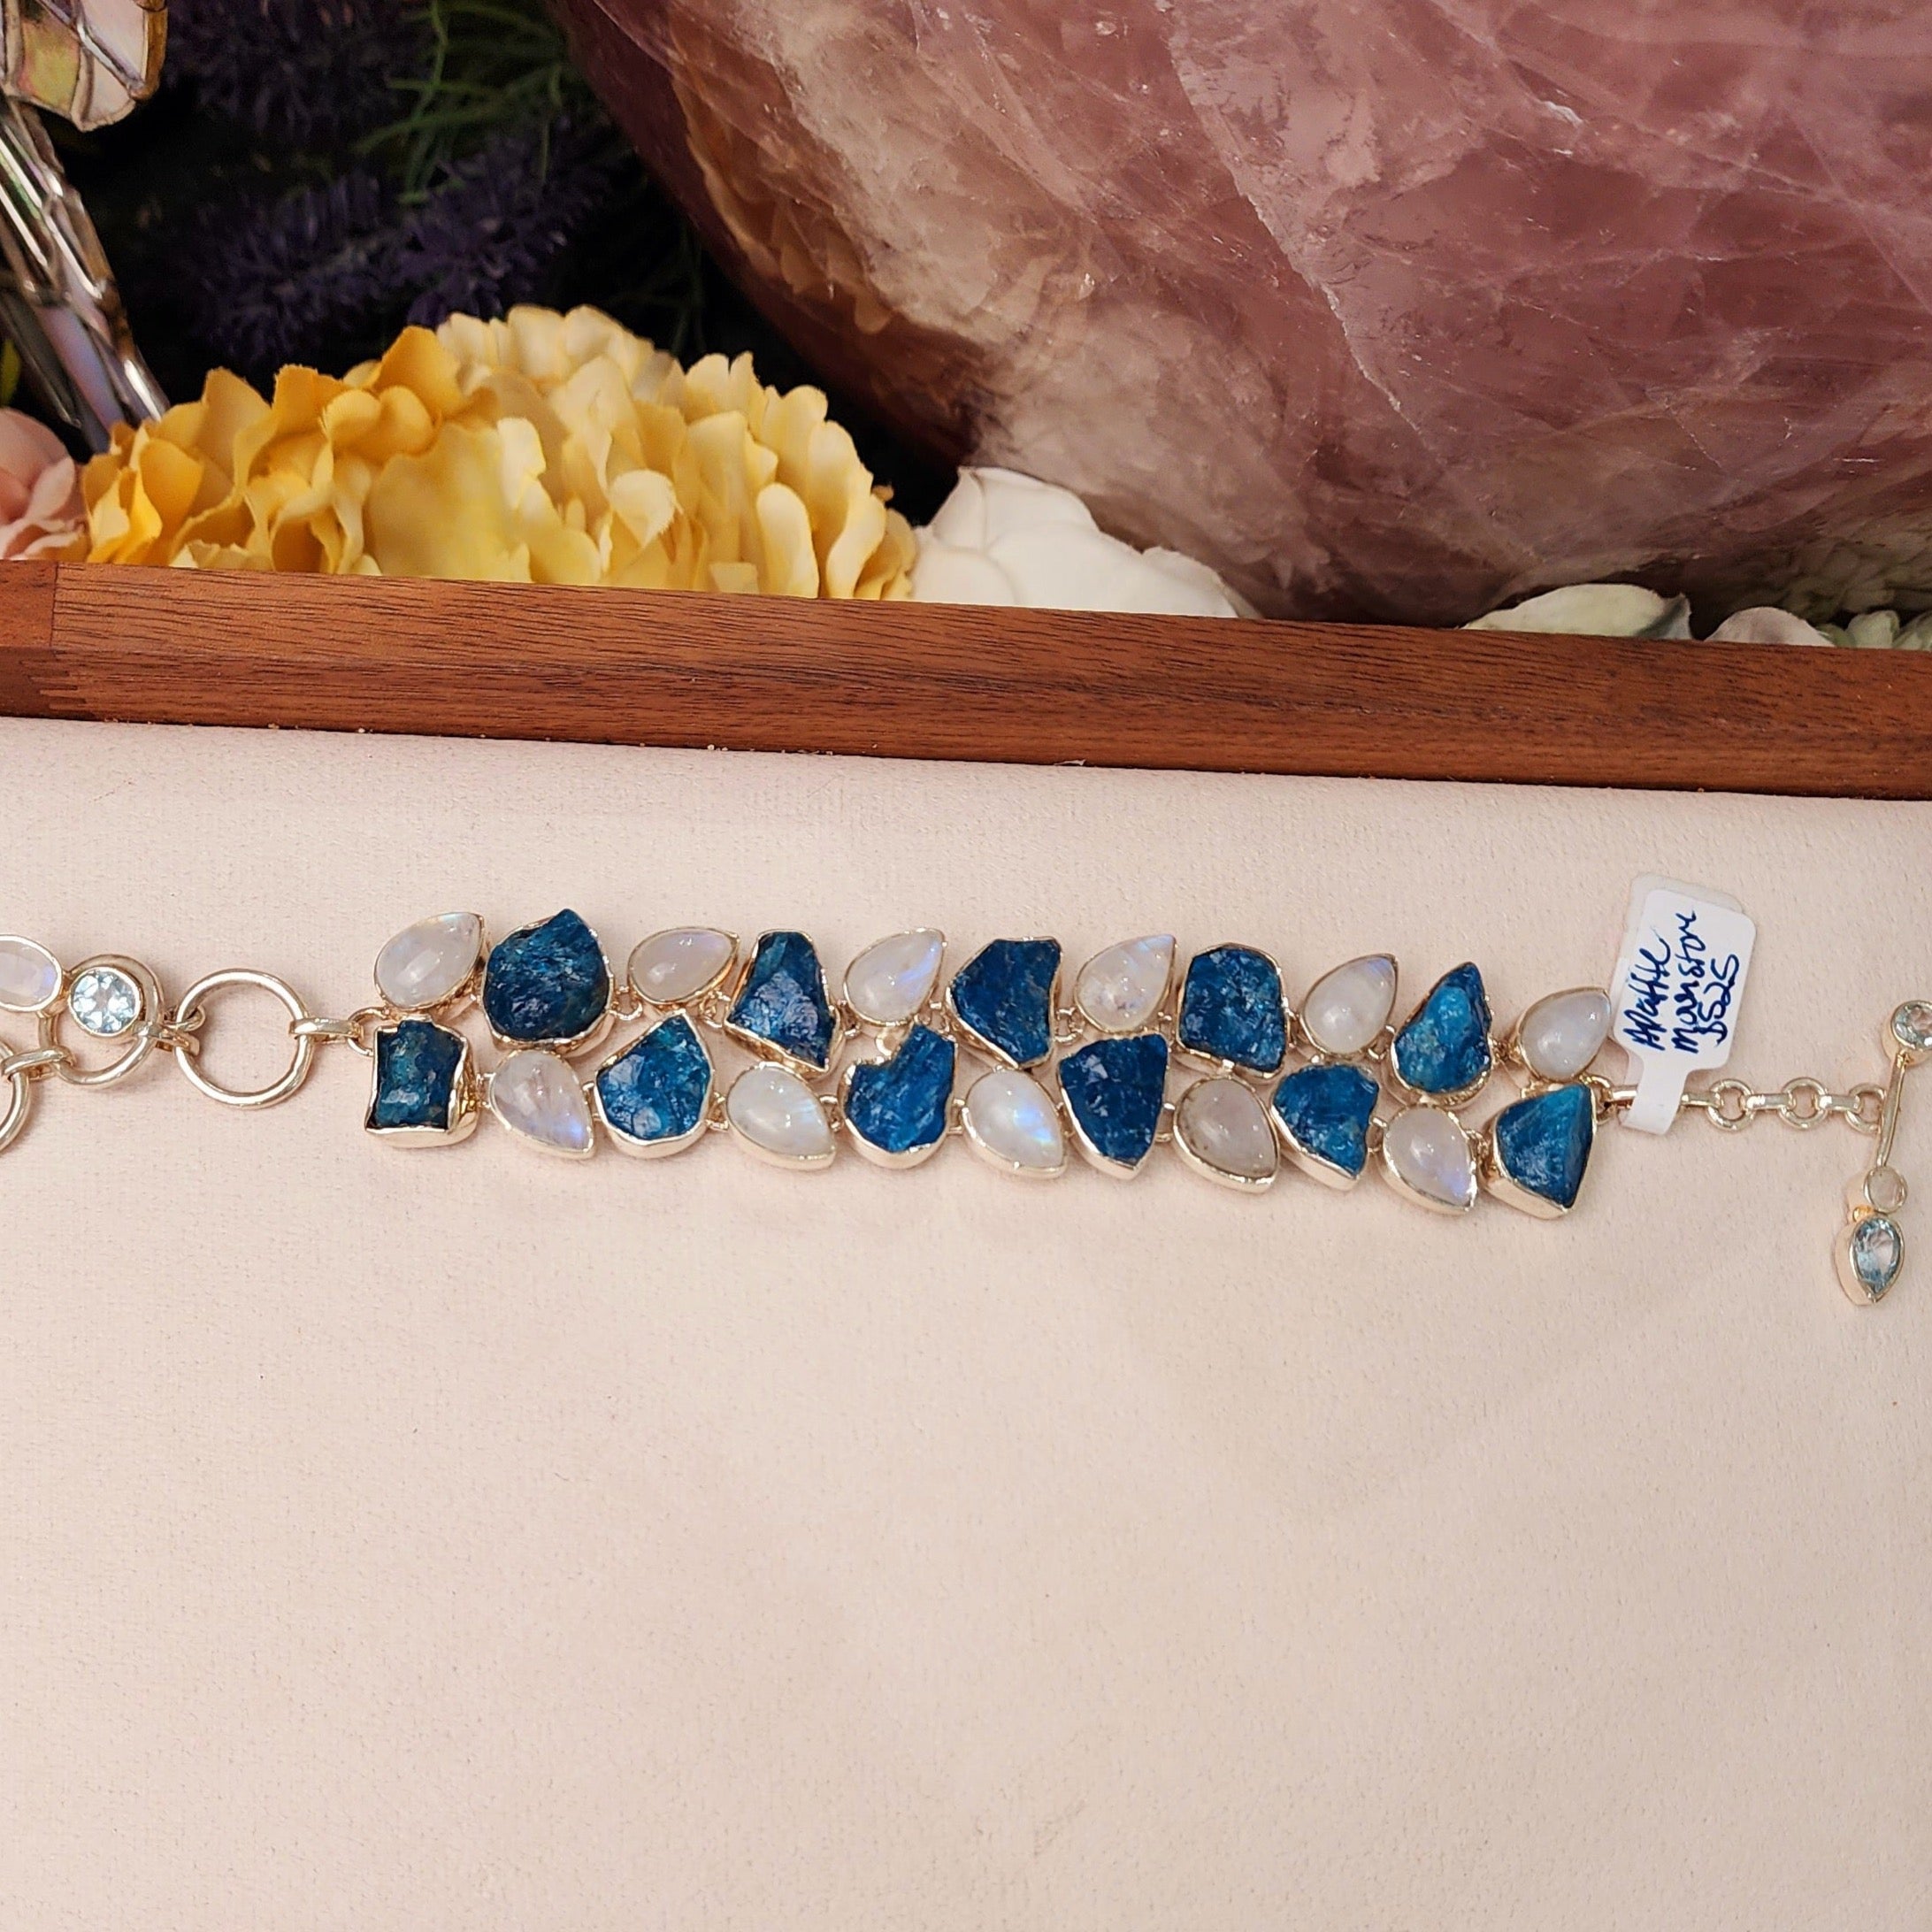 Paraíba Blue Apatite with Rainbow Moonstone Statement Bracelet .925 Silver for Starting Fresh and Healthy Choices